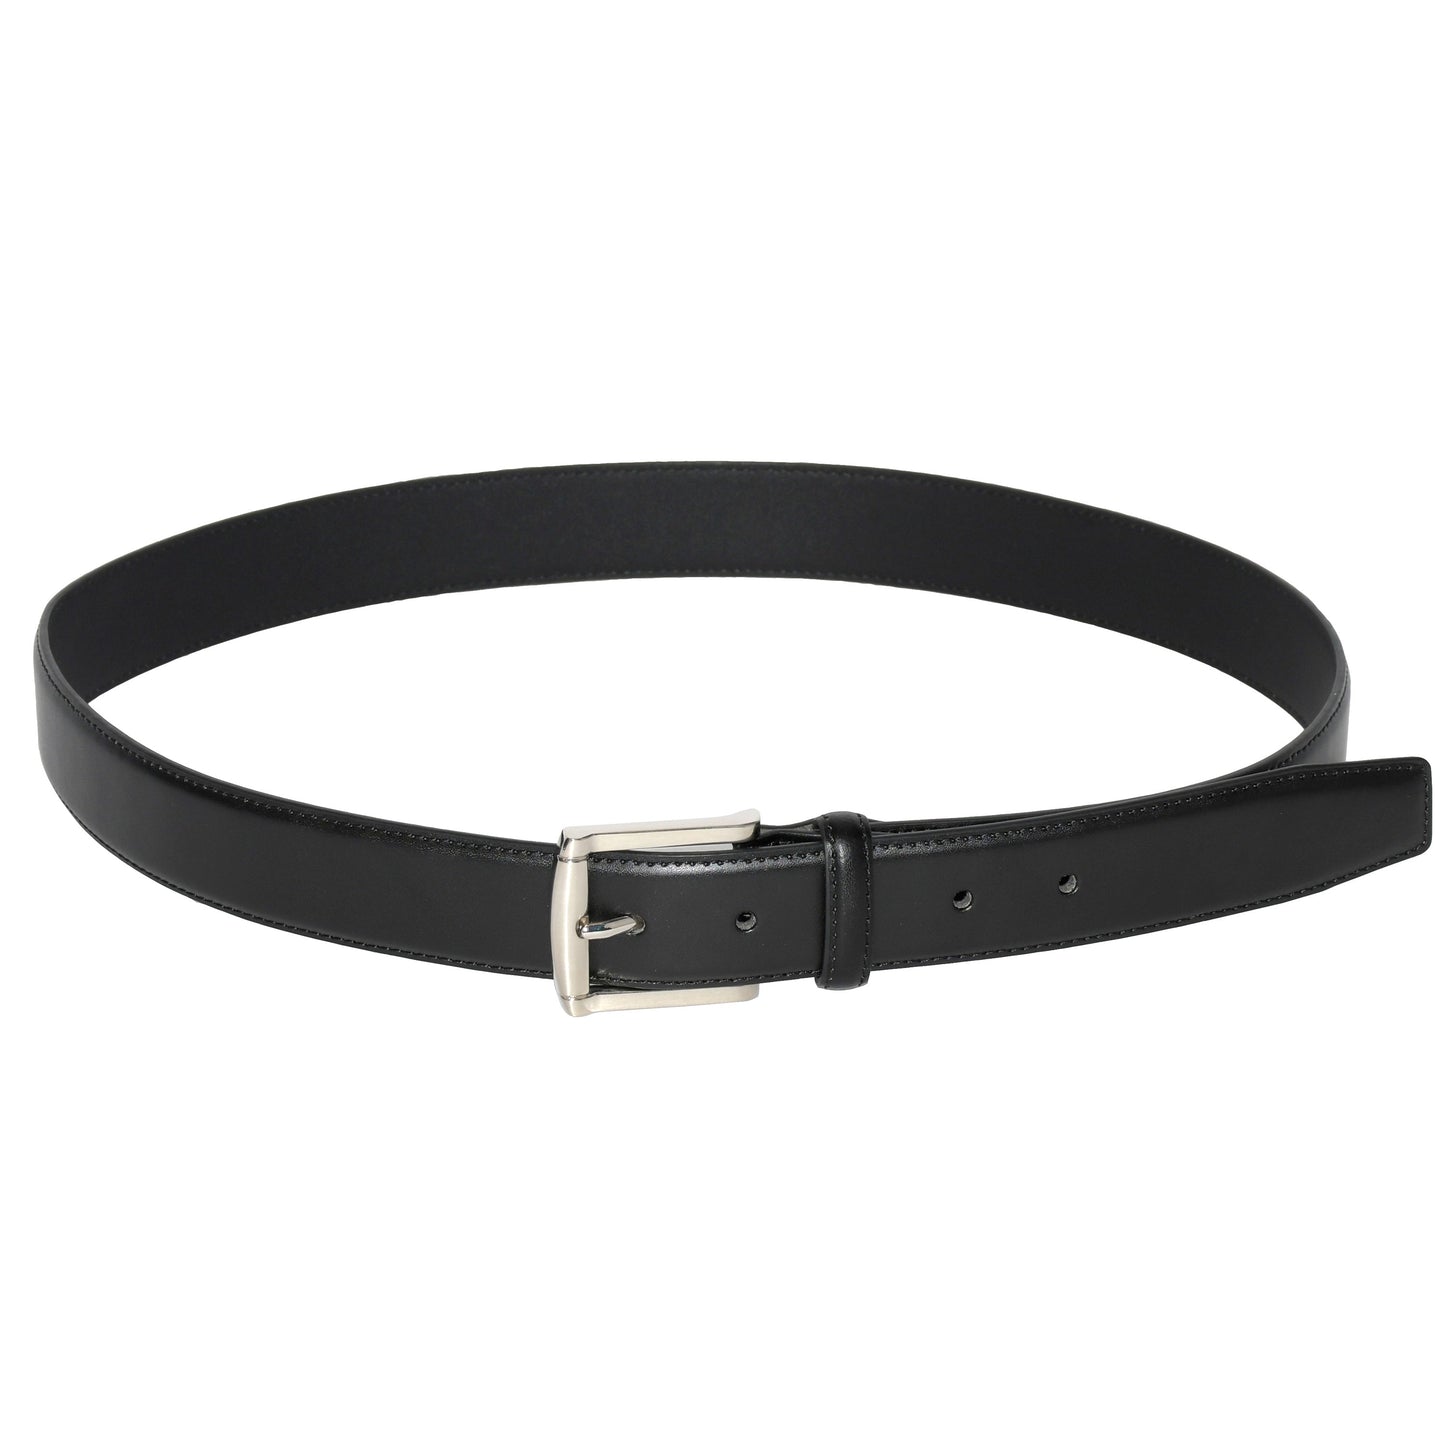 Men's Smooth Finish Belt with Shiny Nickel Buckle